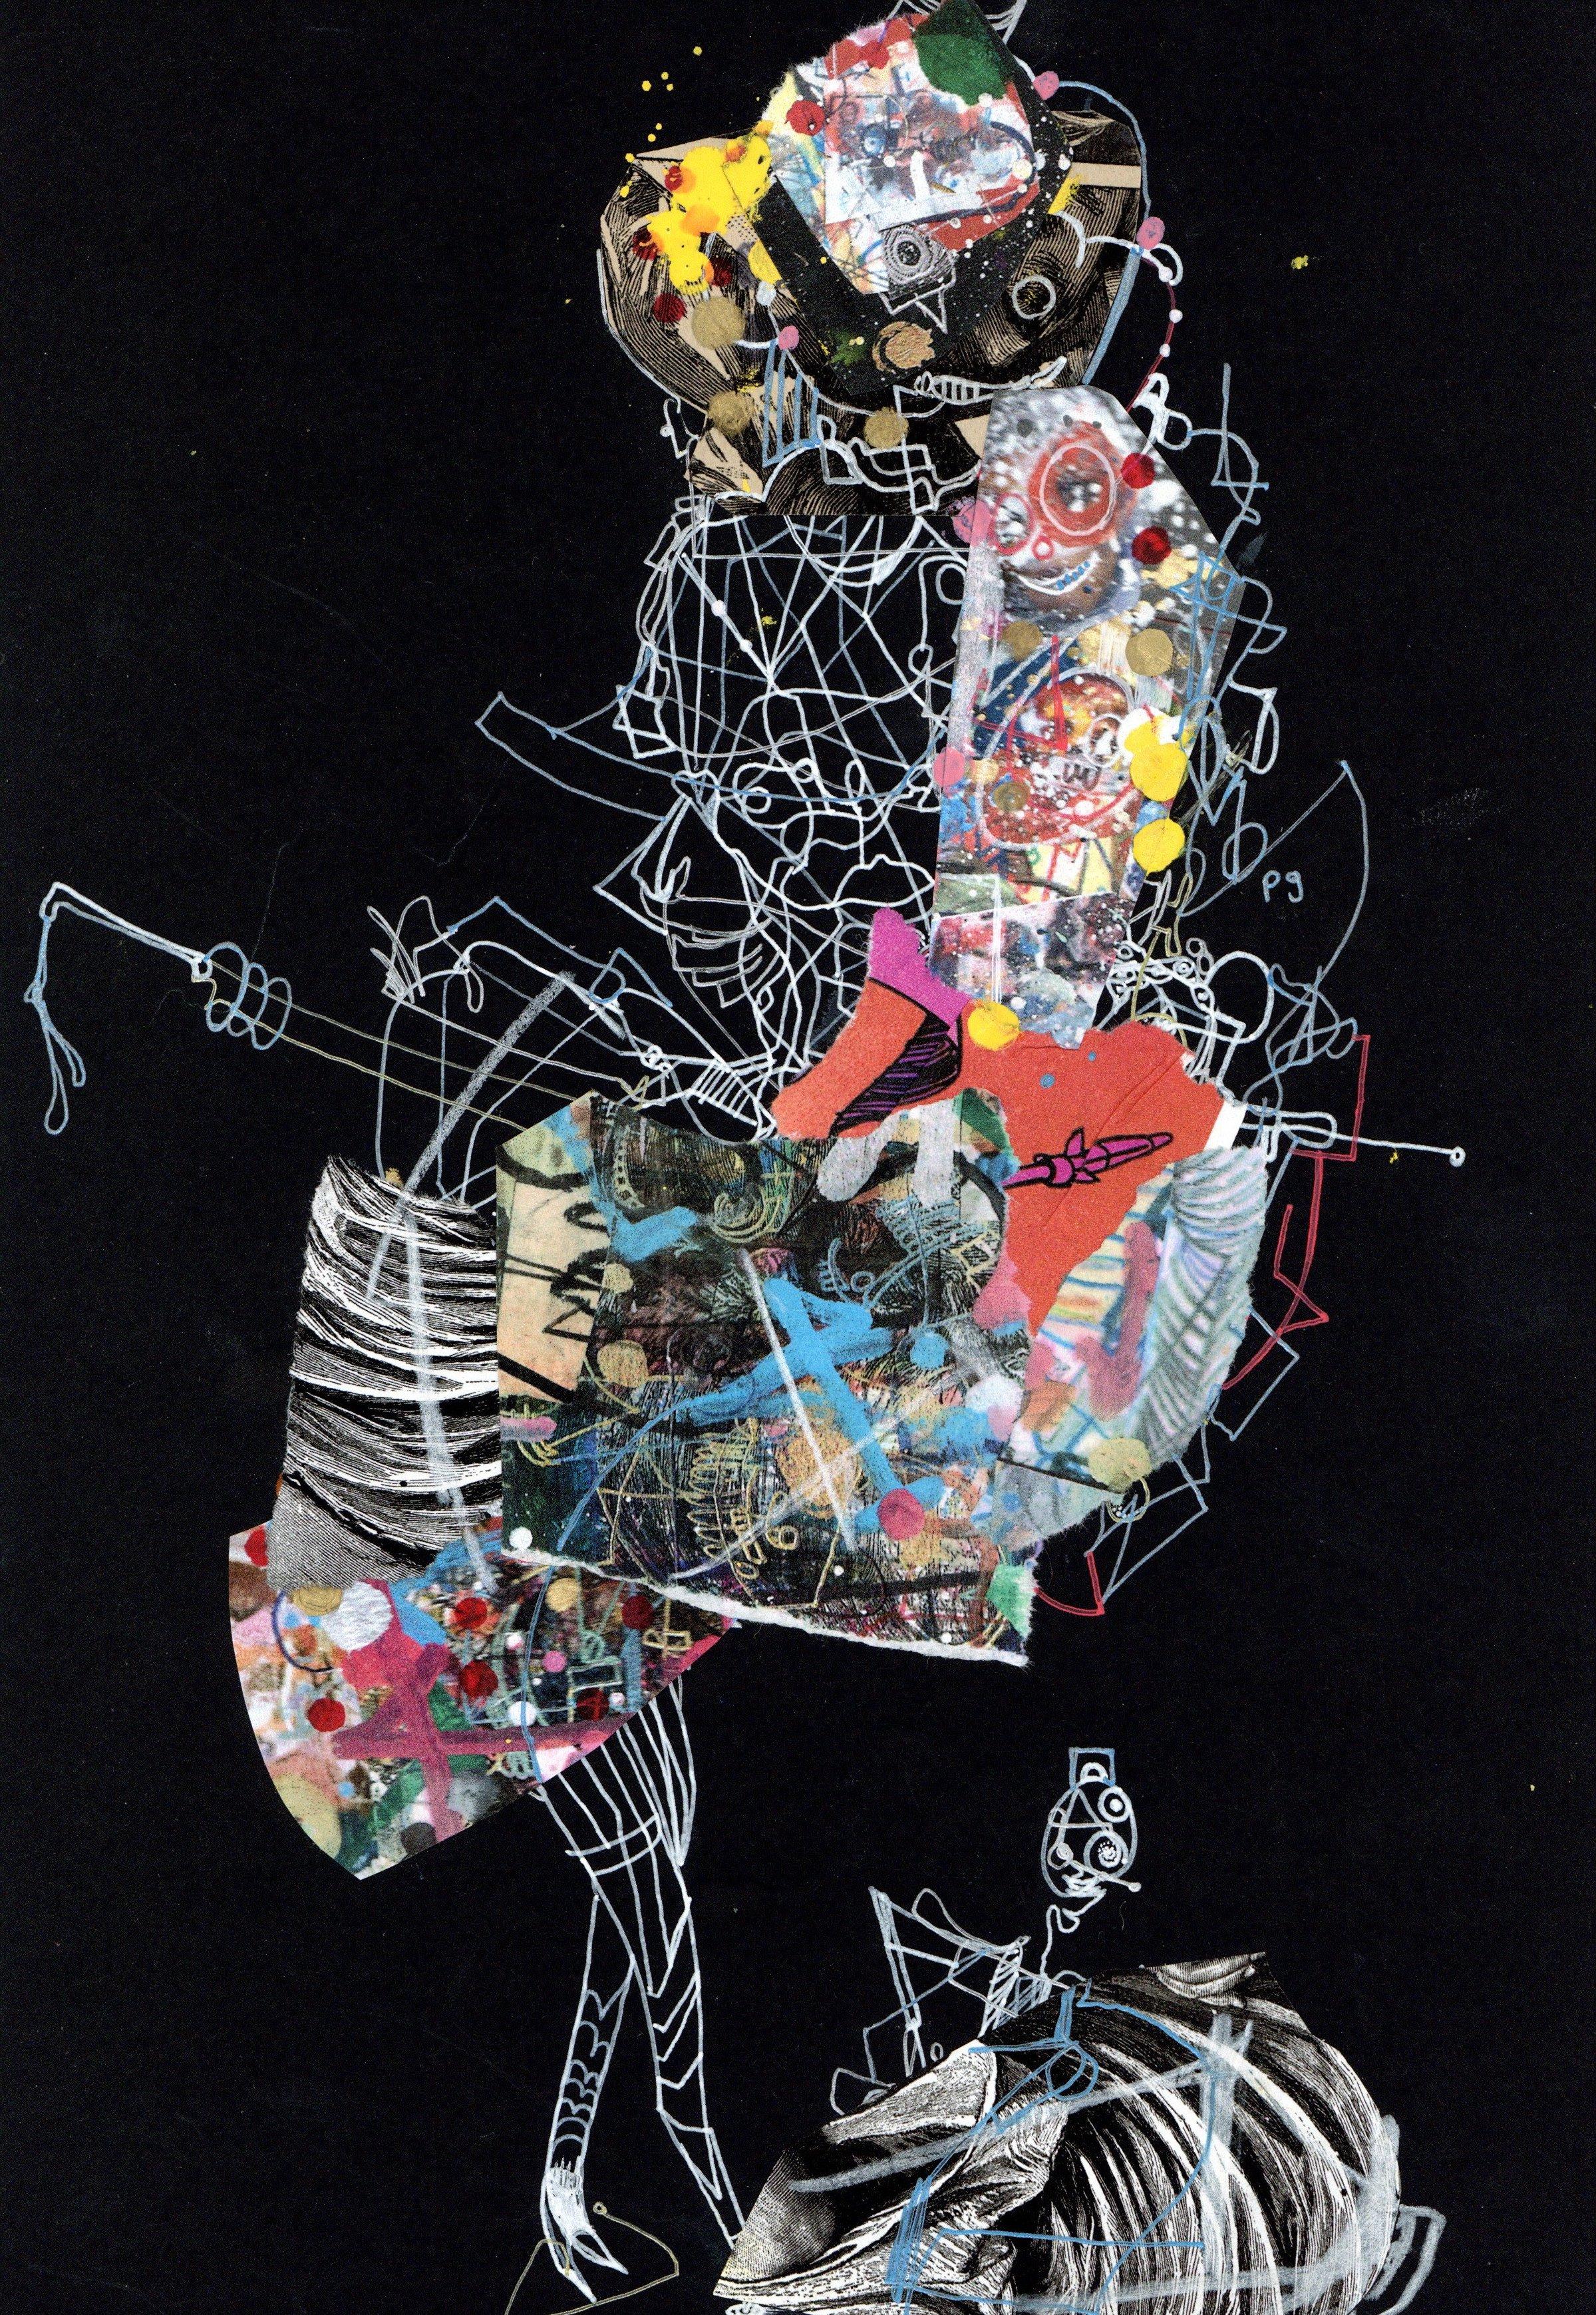 Collage, pen, pencil, paint on paper, pen drawing on verso

Michael Alan is an American artist born in 1977 who lives & works in New York, USA. As a multidisciplinary artist. His work has been featured in many solo shows, over 200 group shows, and